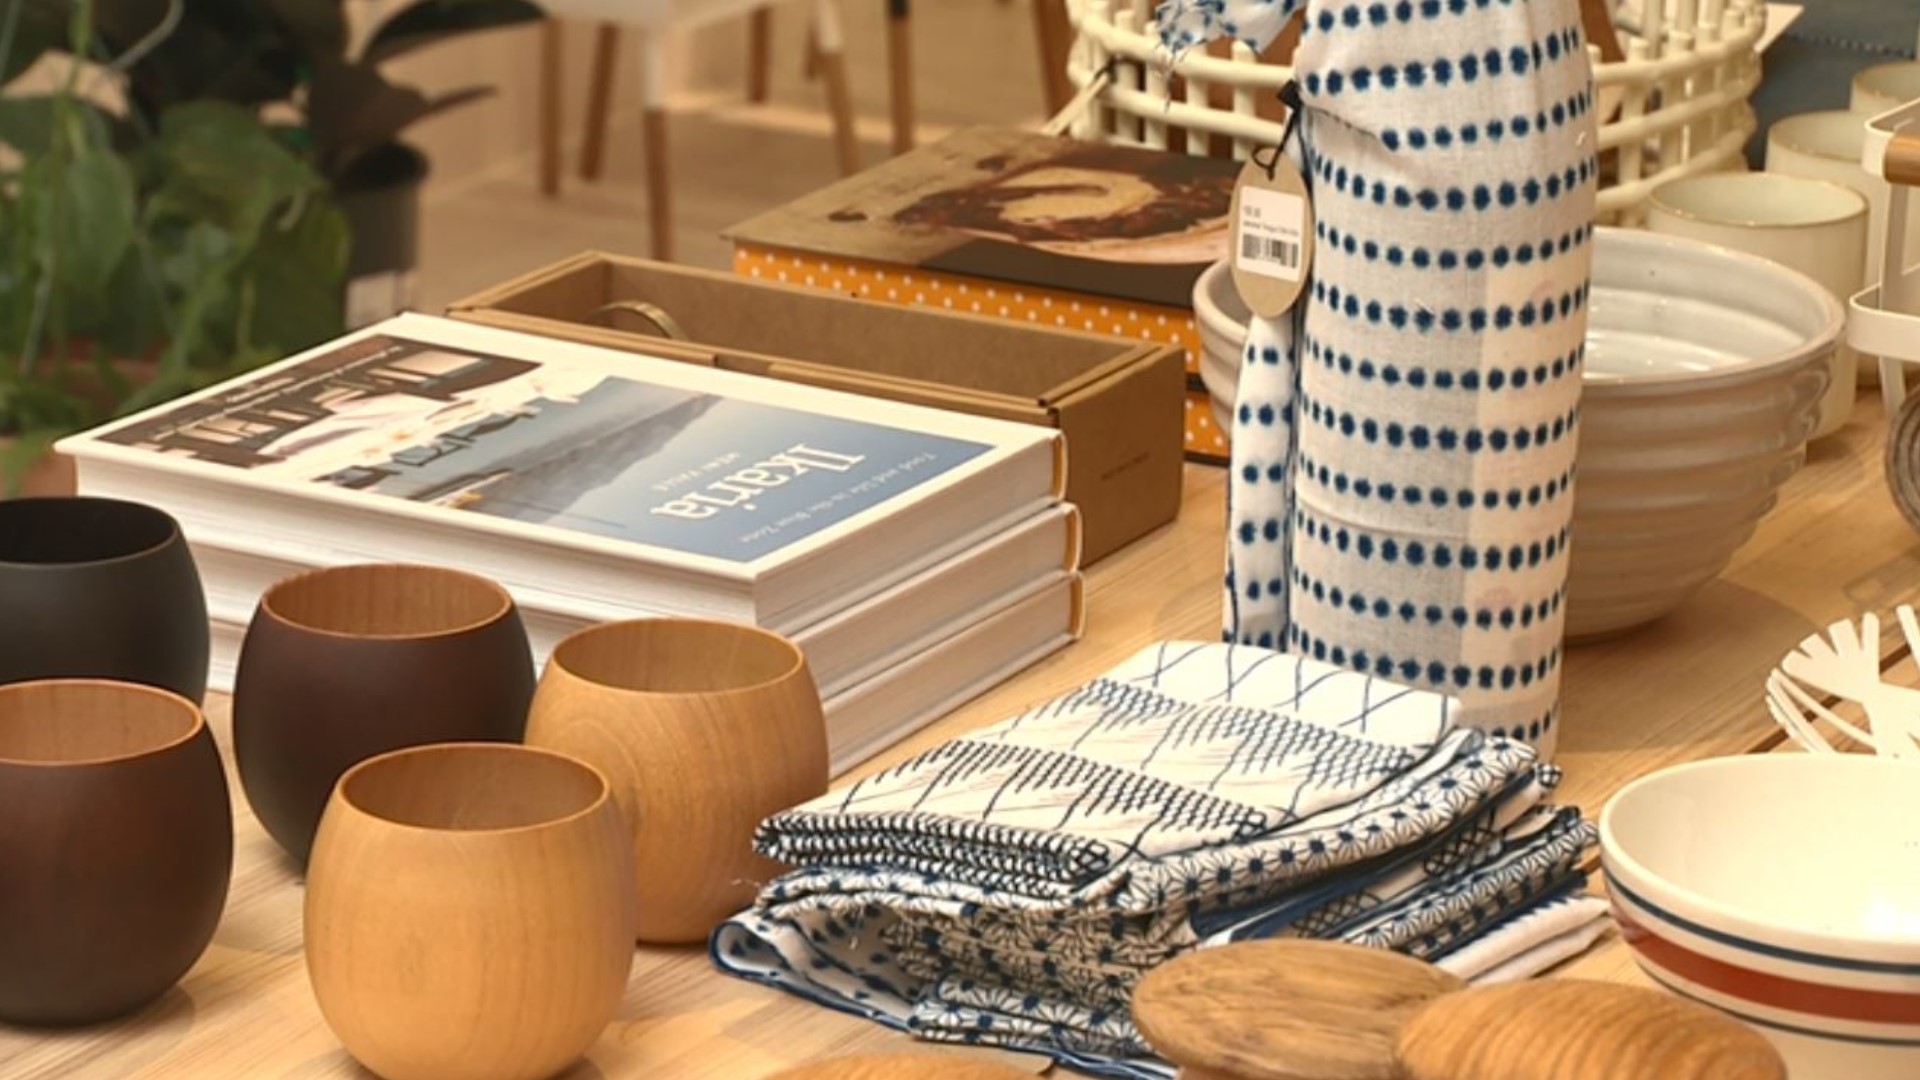 The new shop sells home goods inspired by Scandinavian and Japanese design. #k5evening